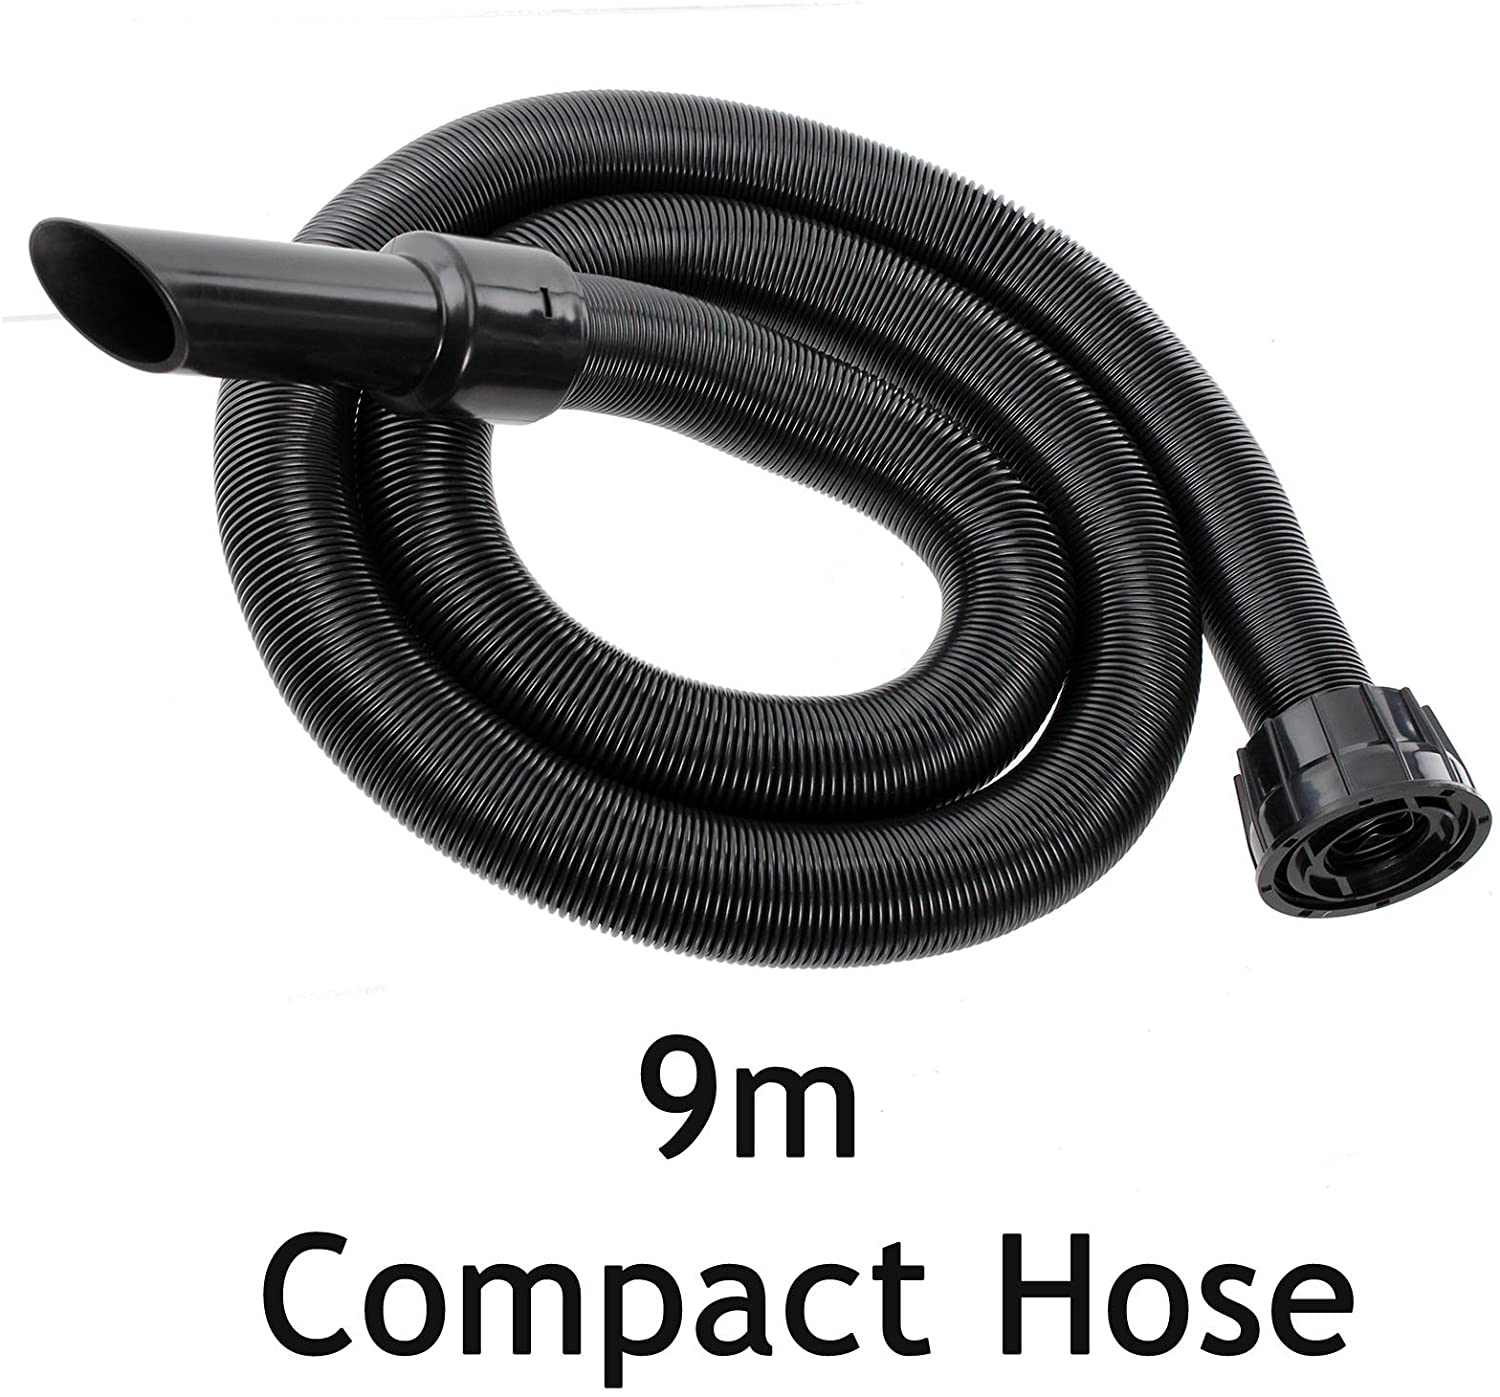 Compact Hose + Telescopic Pipe Rod + Bent End for NUMATIC Henry Hetty Vacuum Cleaner (9m)